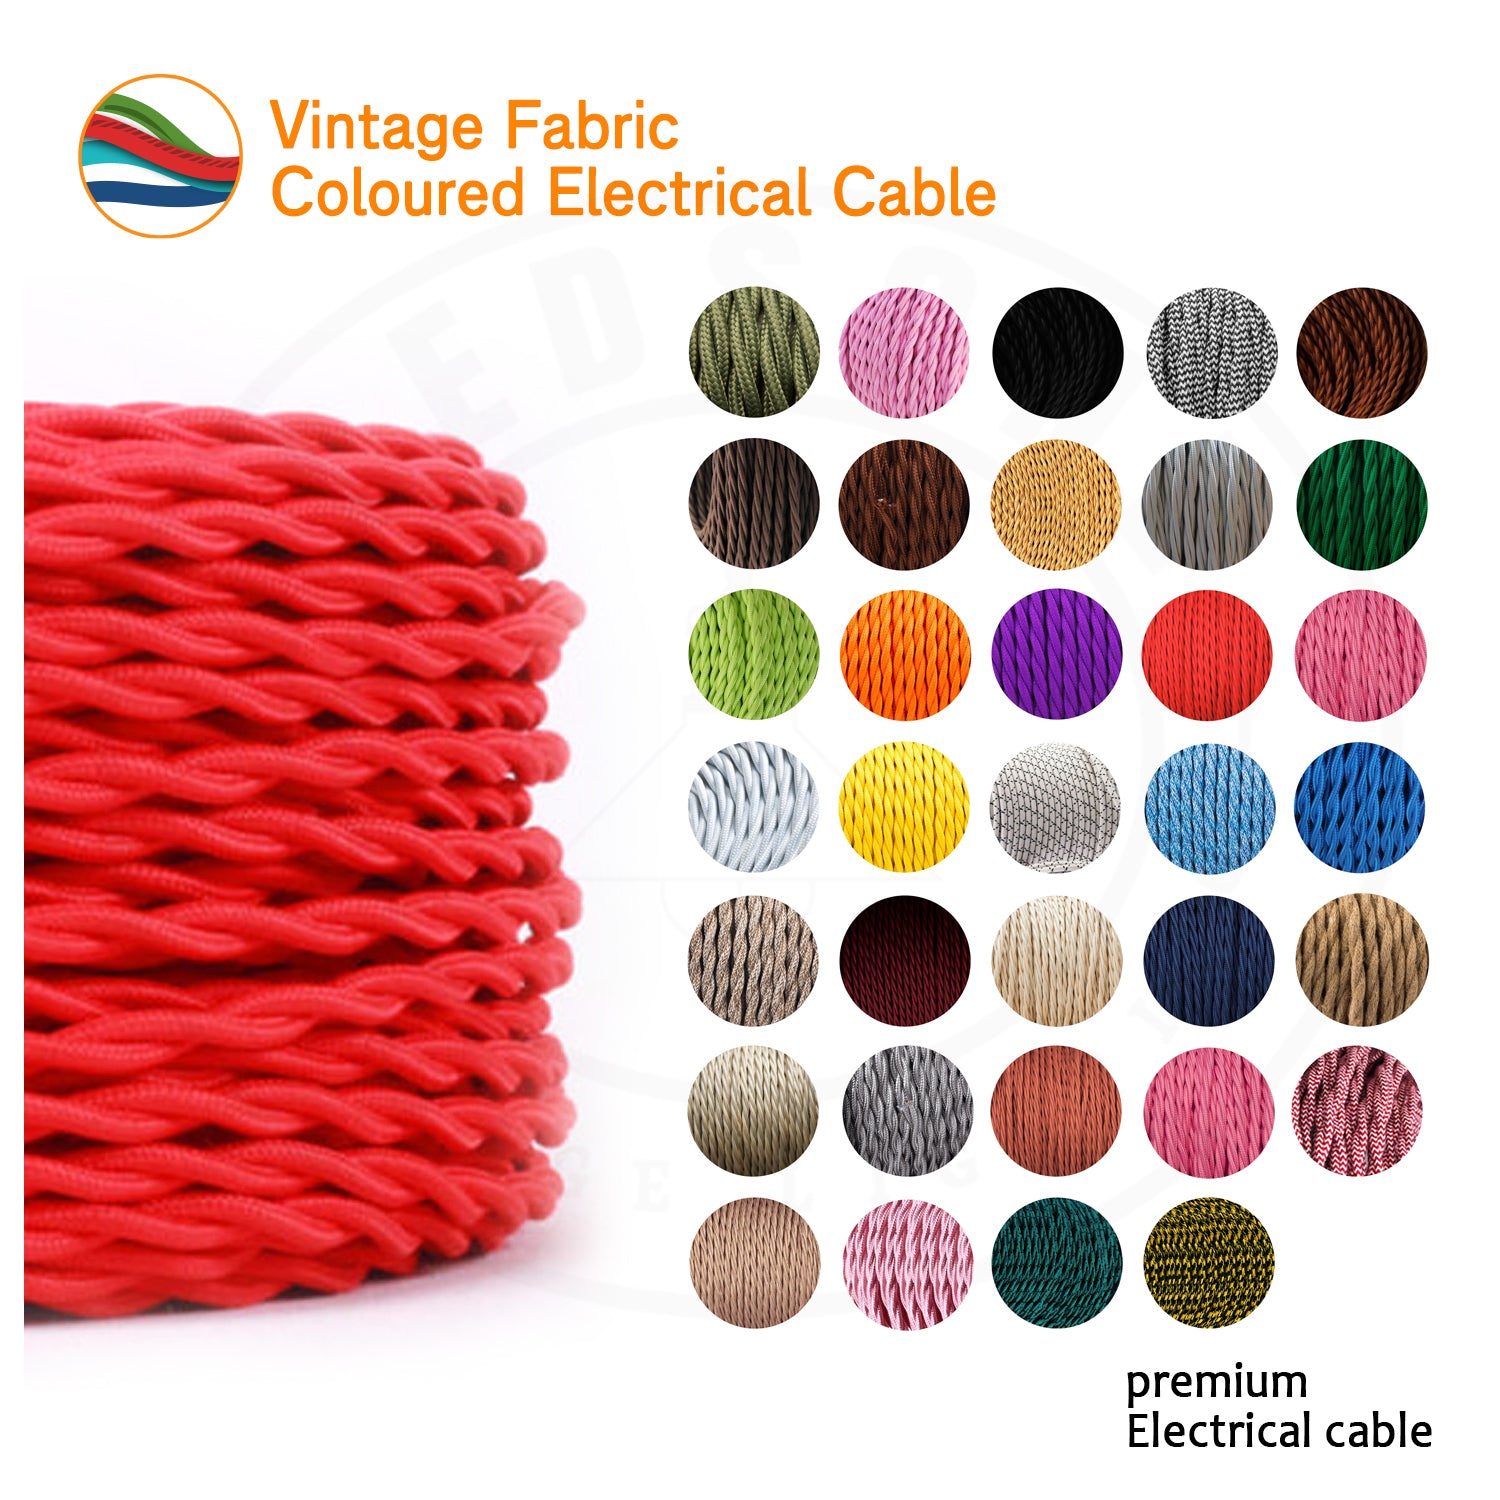 fabric coloured cable.jpg